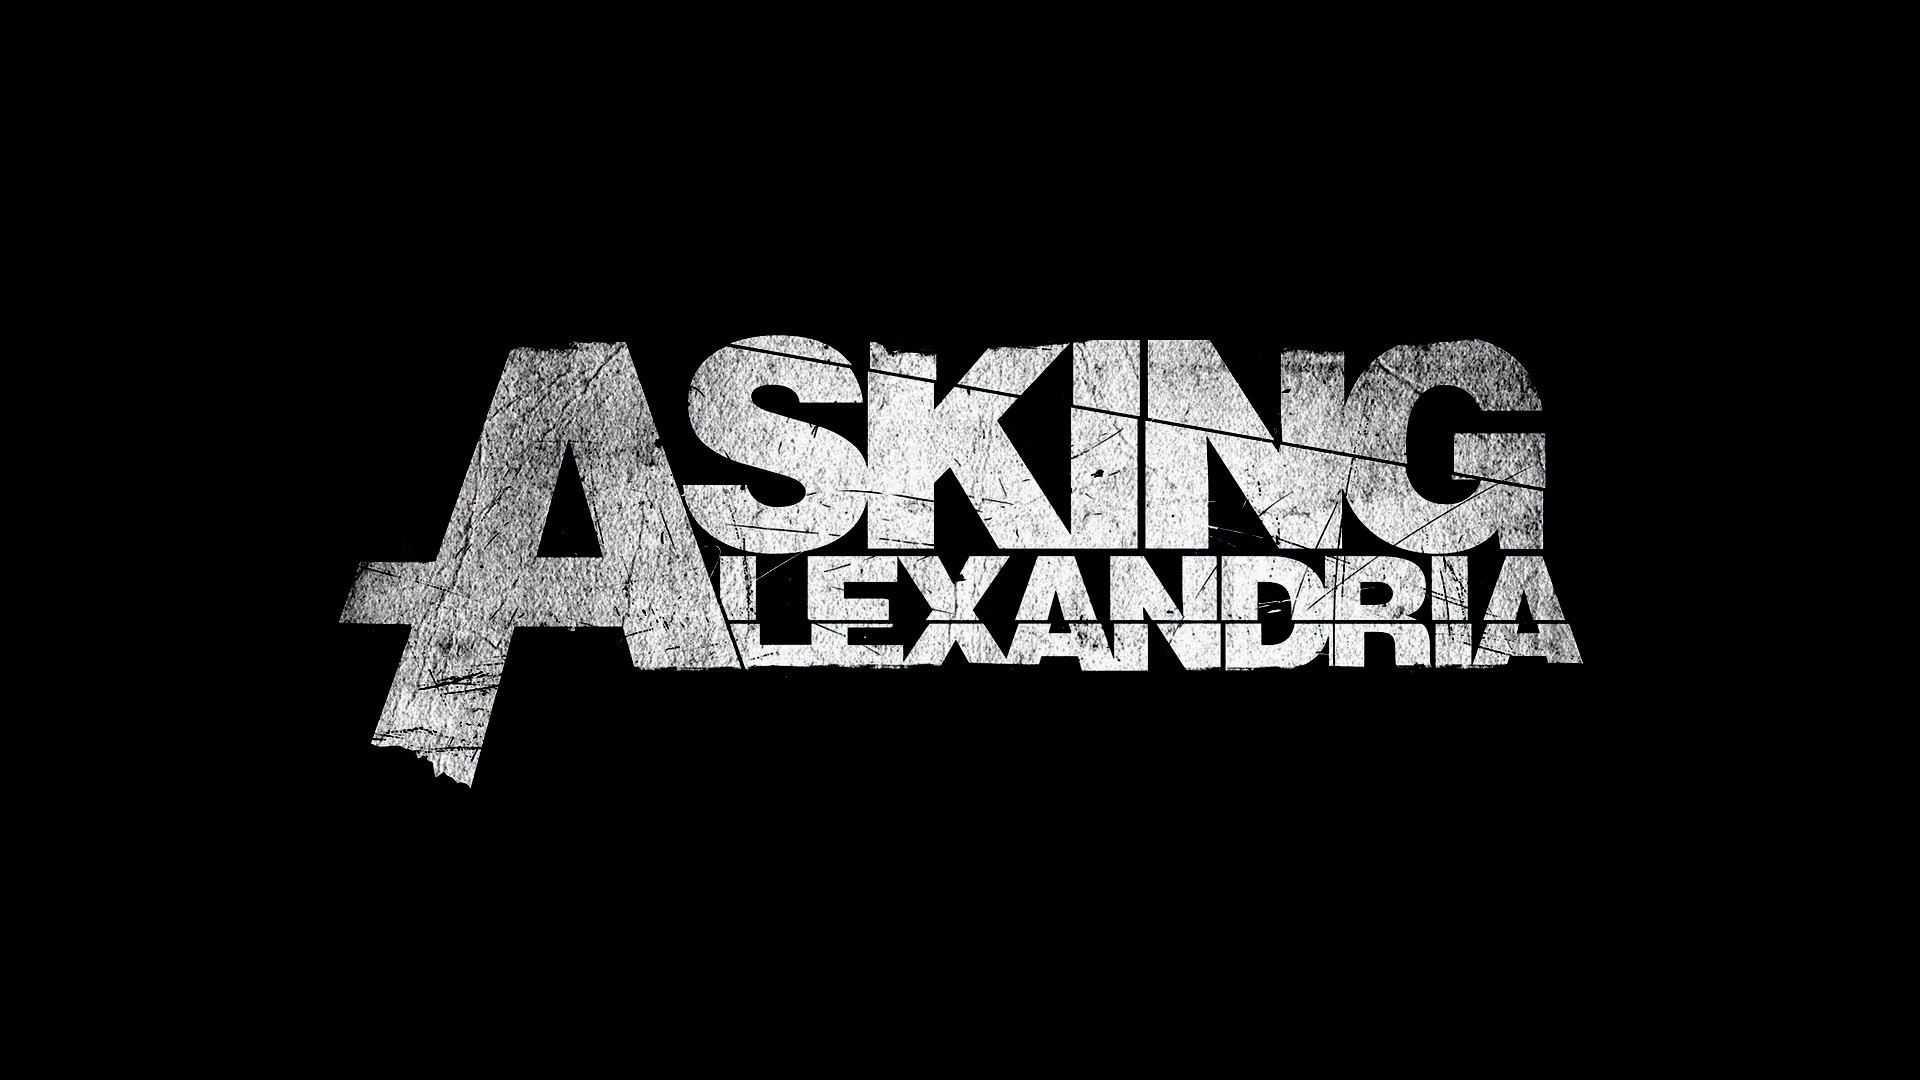 1920x1080 free asking alexandria background hd wallpapers background photos windows  amazing best wallpaper ever samsung wallpapers download pictures 1920Ã1080  ...